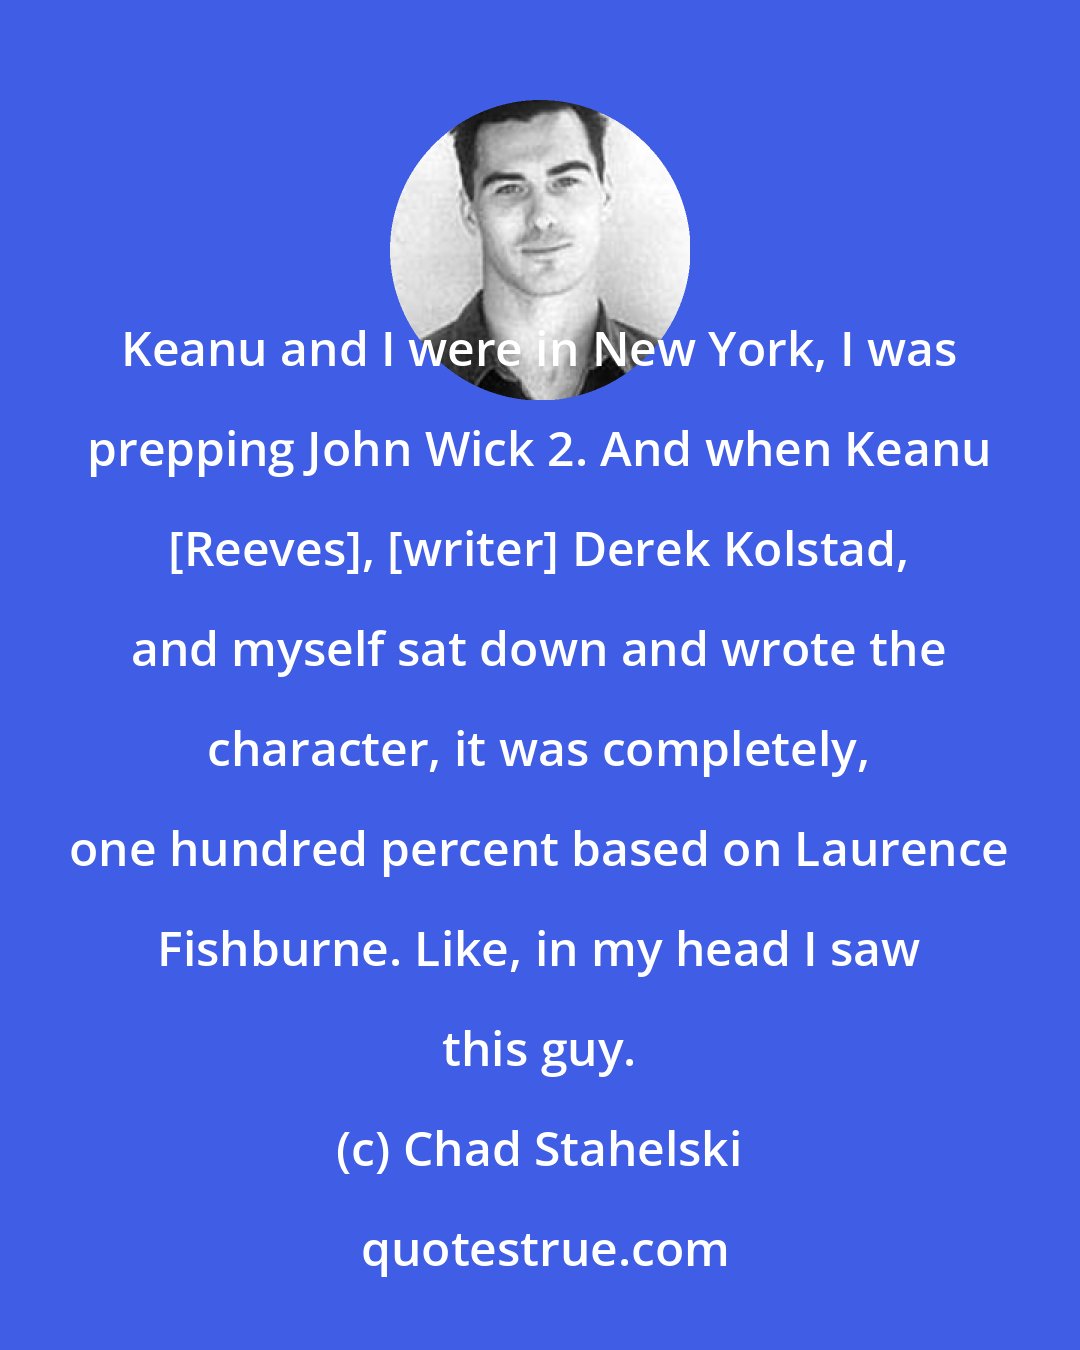 Chad Stahelski: Keanu and I were in New York, I was prepping John Wick 2. And when Keanu [Reeves], [writer] Derek Kolstad, and myself sat down and wrote the character, it was completely, one hundred percent based on Laurence Fishburne. Like, in my head I saw this guy.